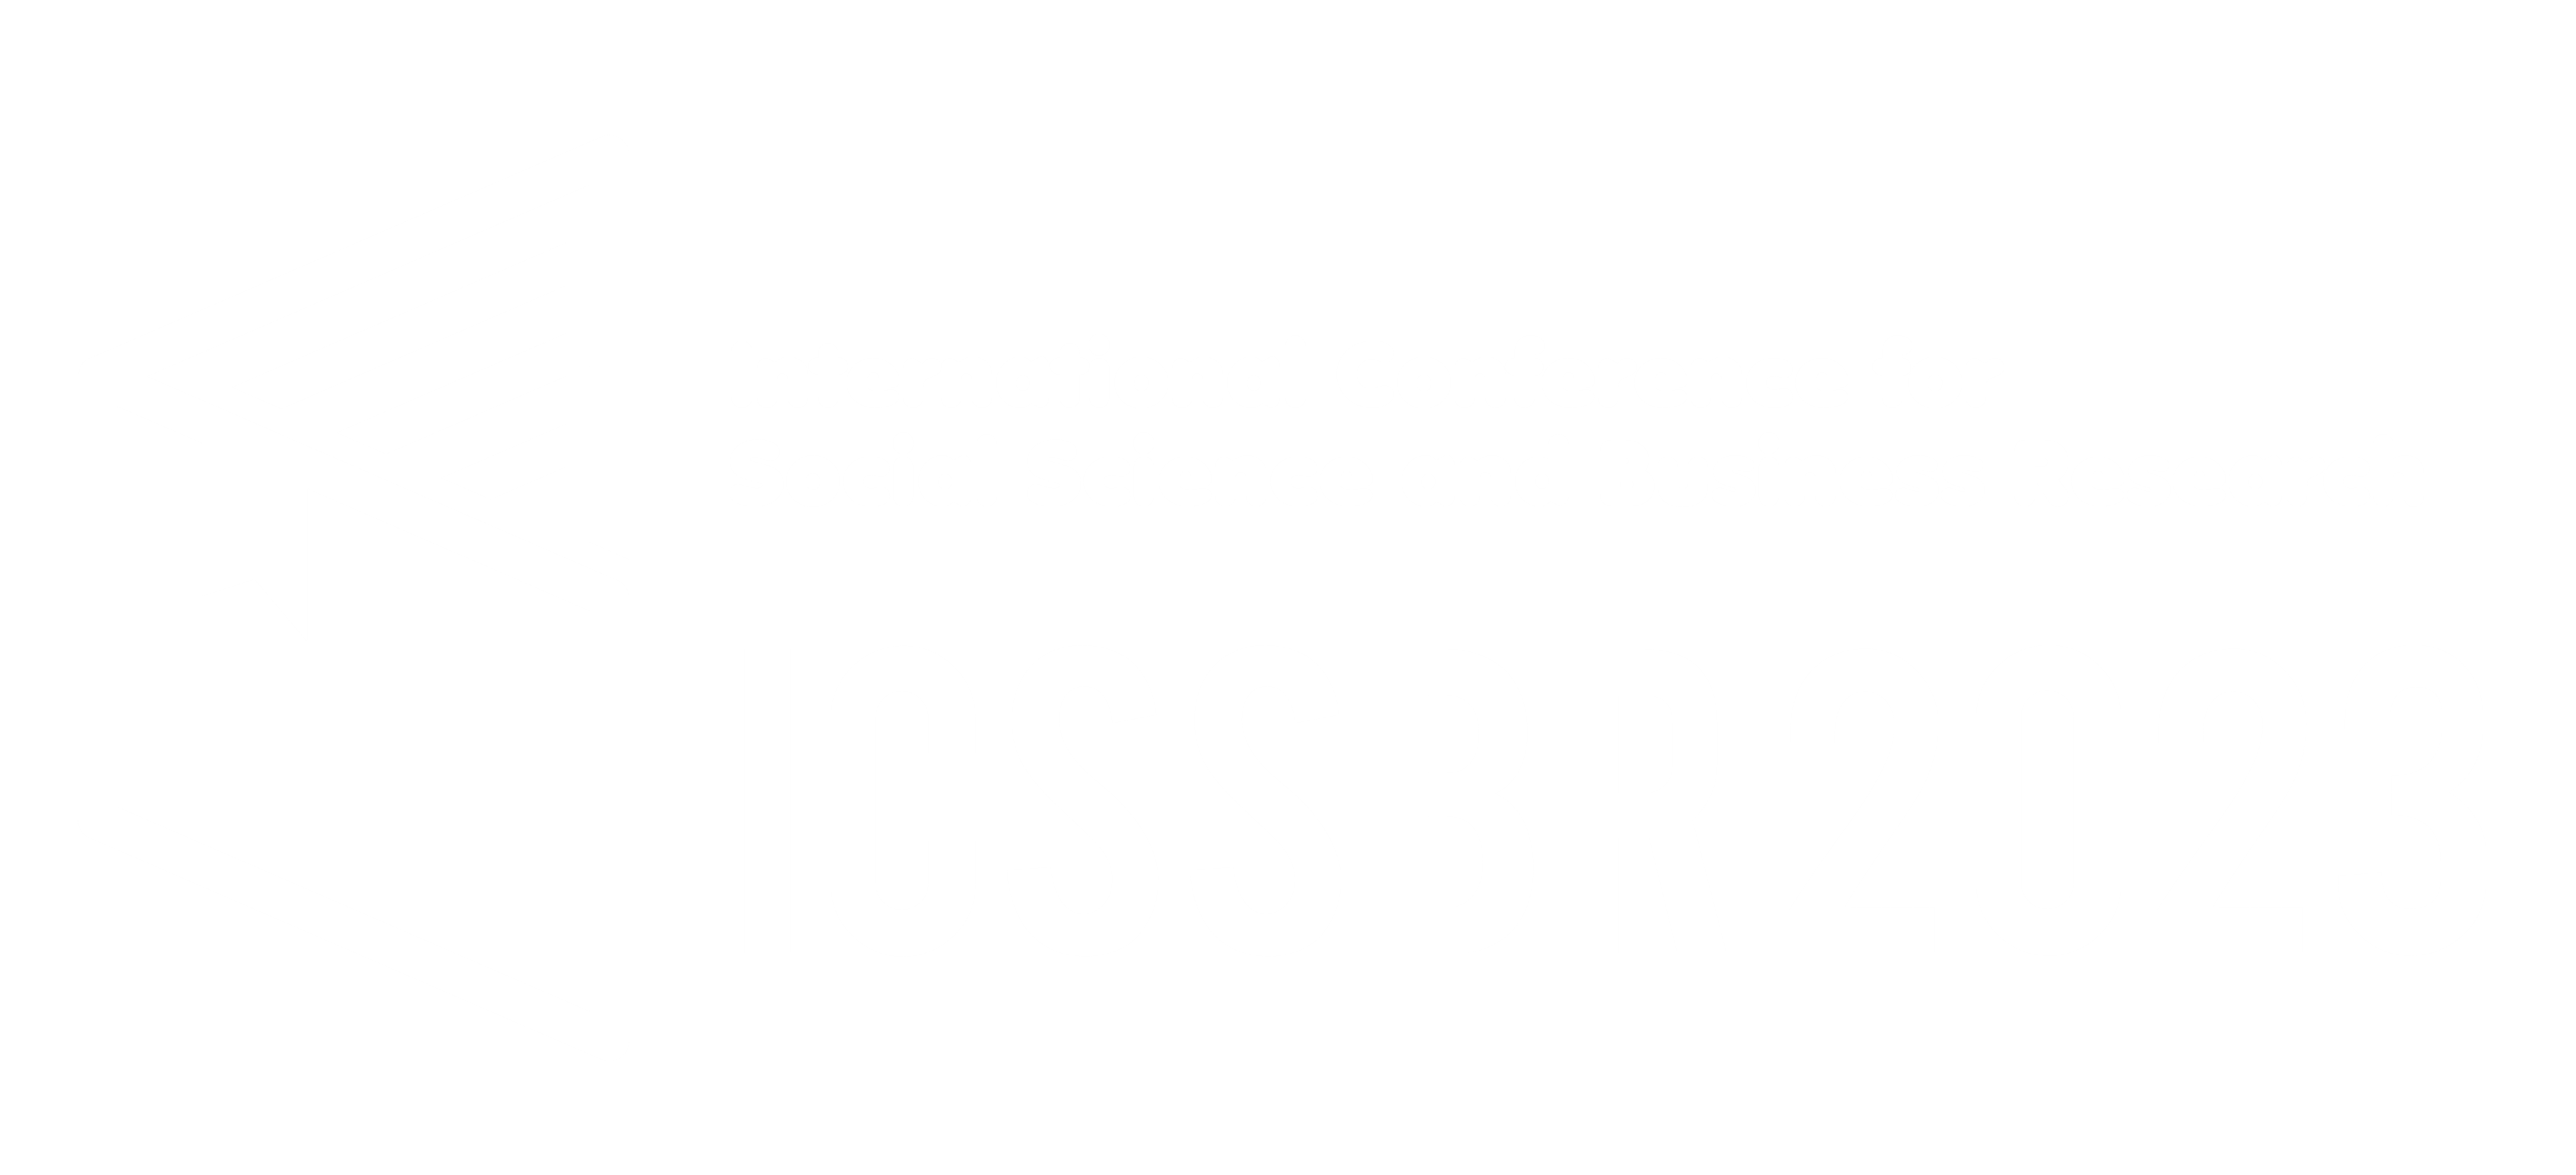 International Conference for Social Science and Business Research (ICSSBR) 2023